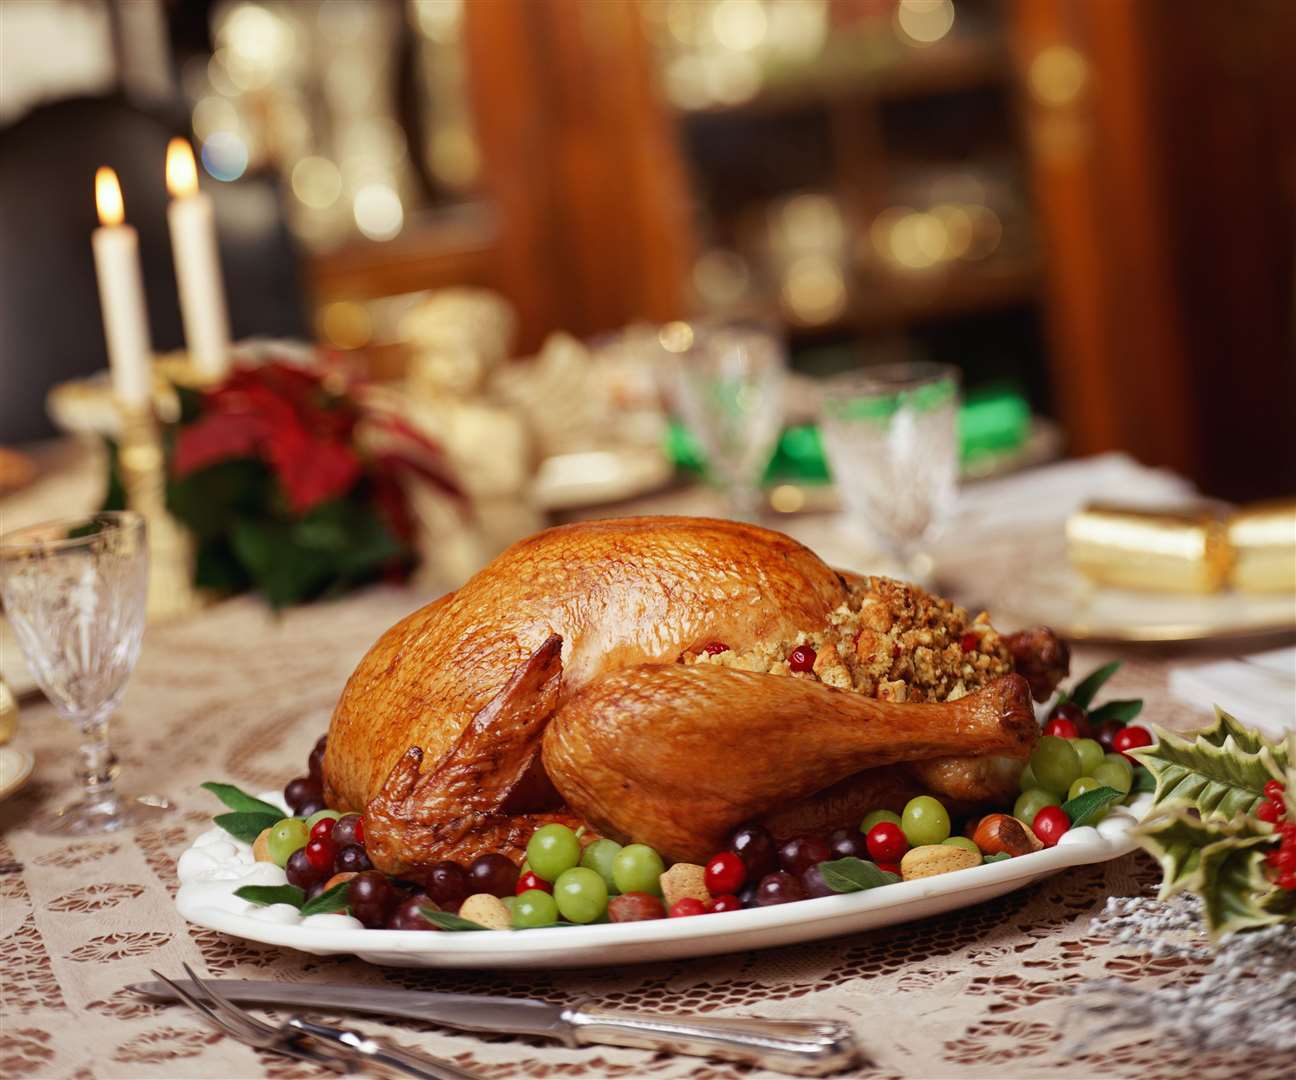 There will be a full roast turkey dinner at the event on Sunday. Stock image: Thinkstock